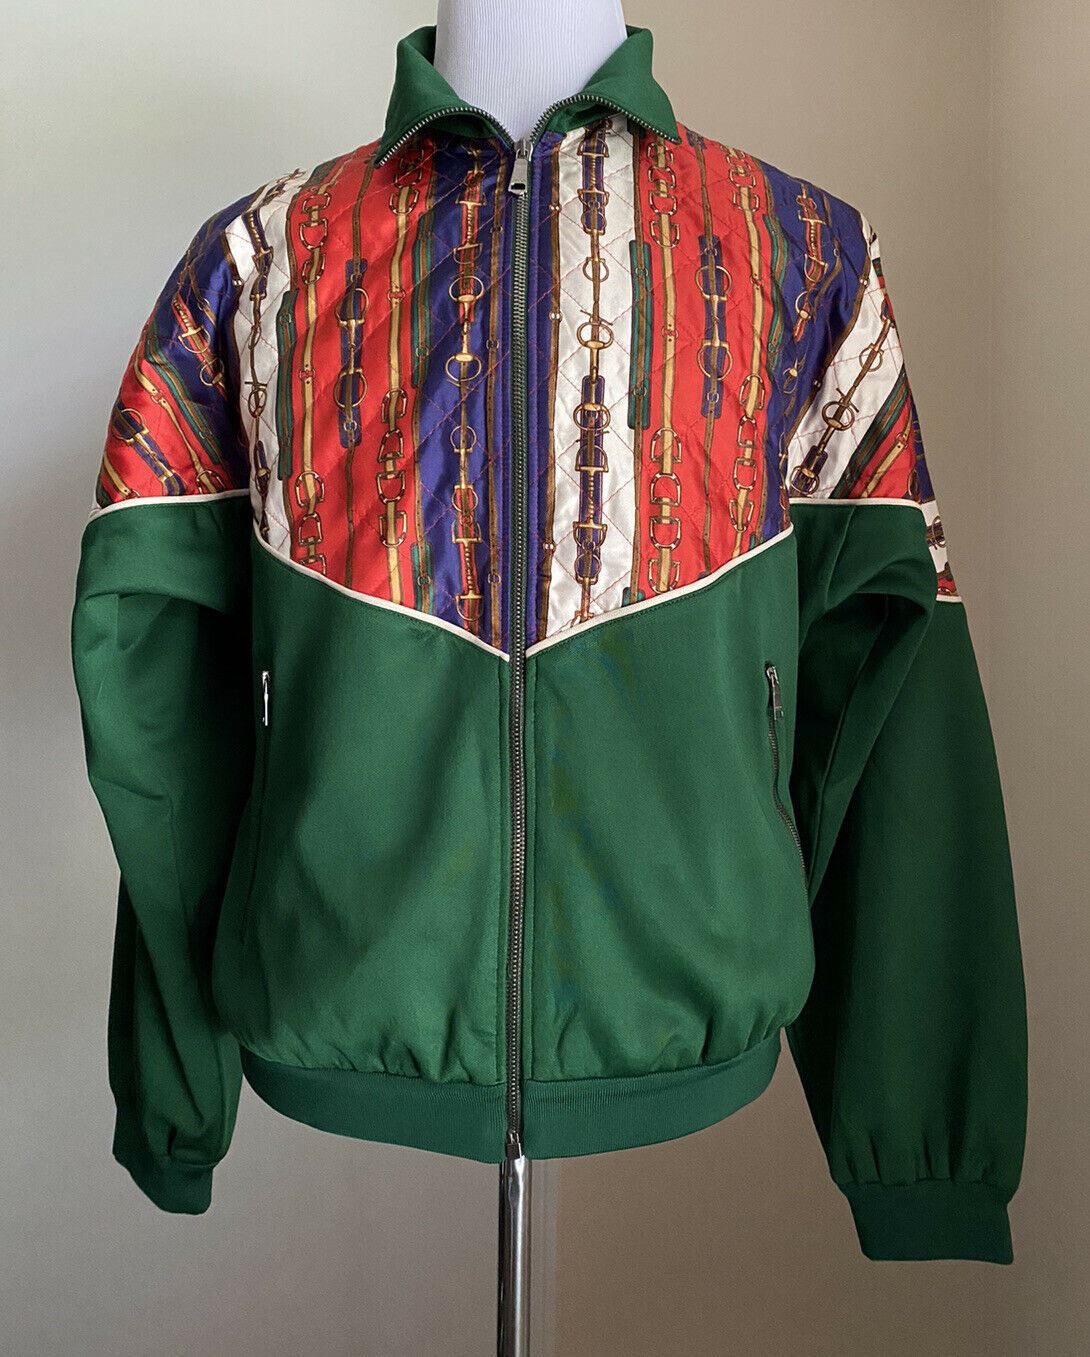 NWT $2980 Gucci Men's Track Jacket Green/Multicolor Size M Italy